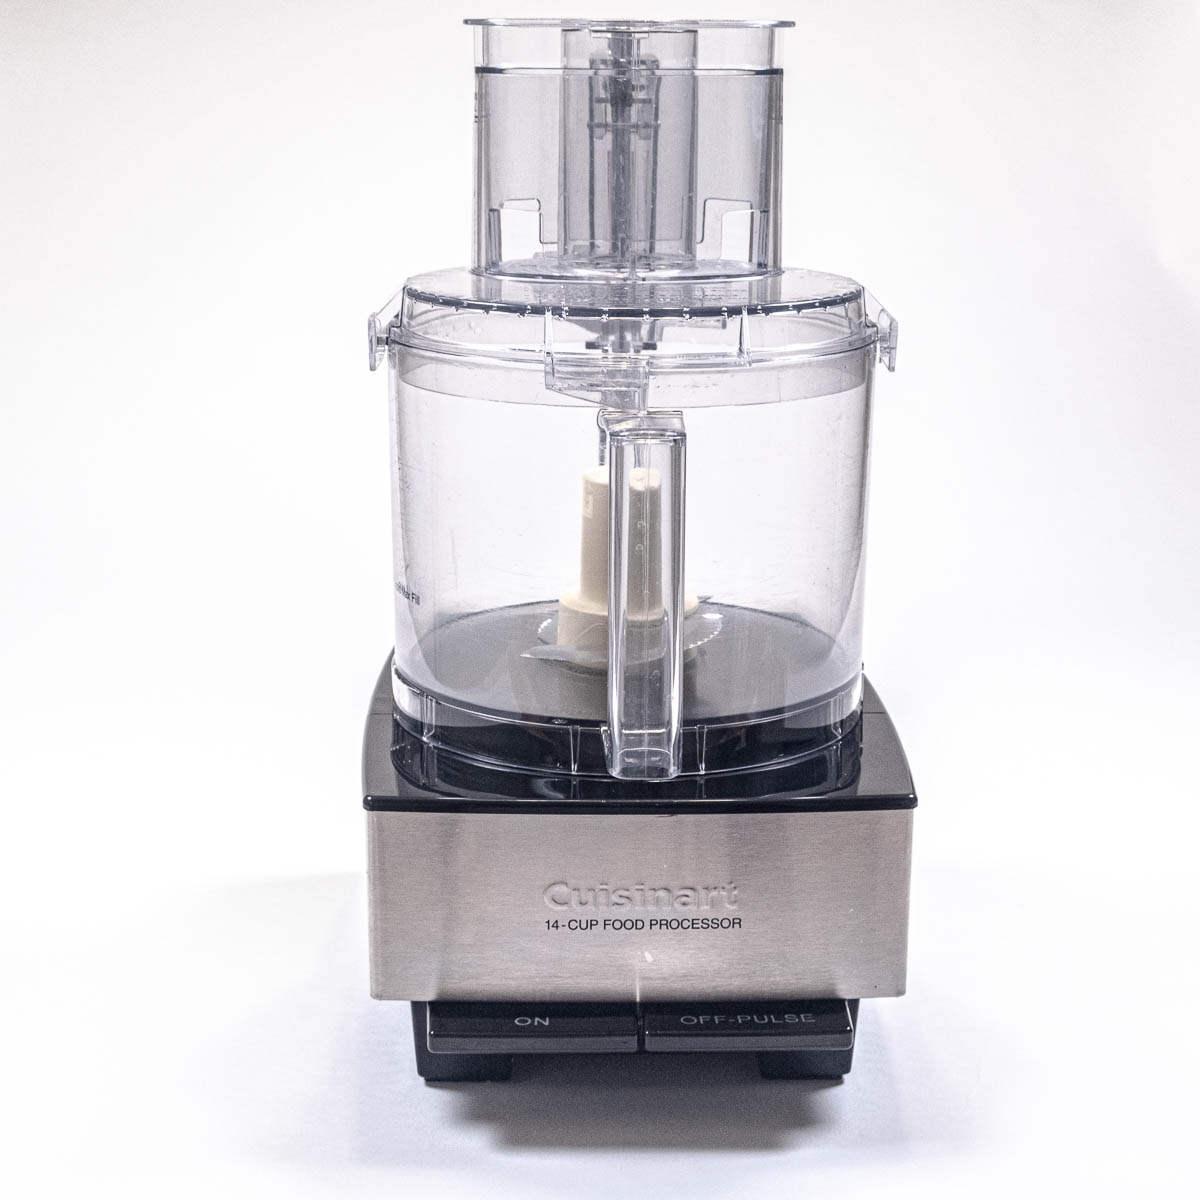 how to use a food processor for baking? 2